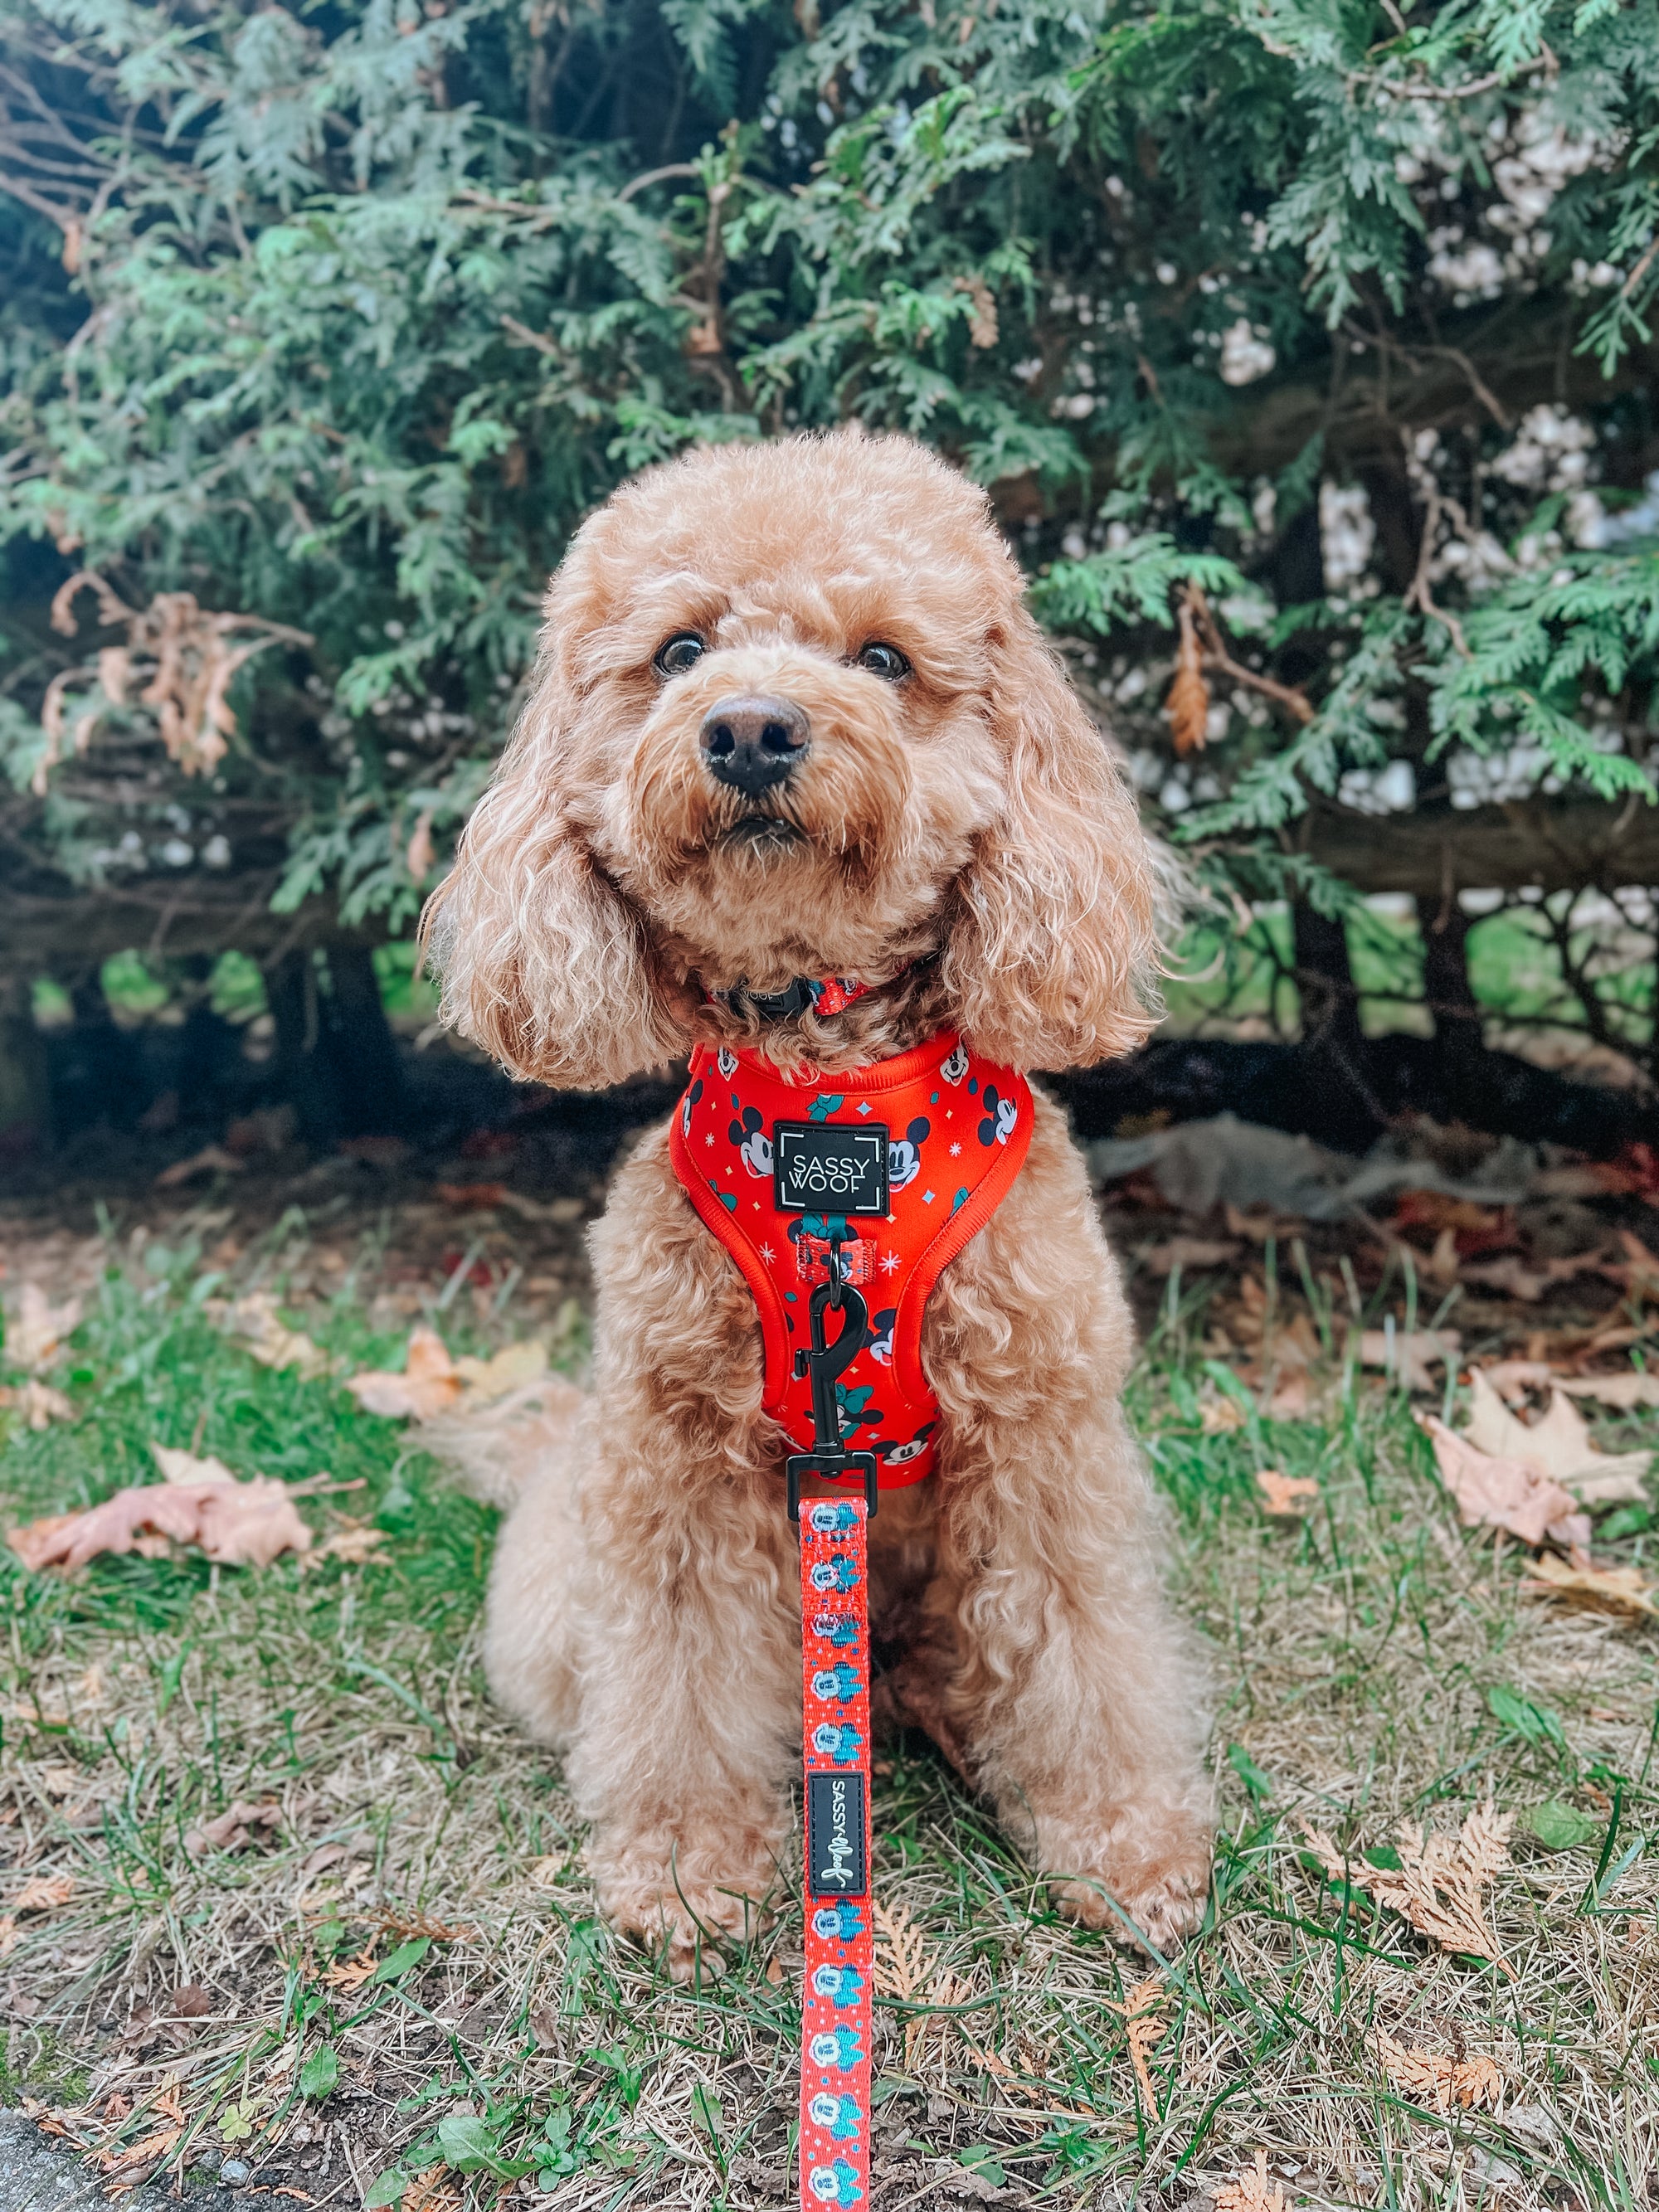 INFLUENCER_CONTENT | @GEORGIE.THECAVAPOO | SIZE S & XS